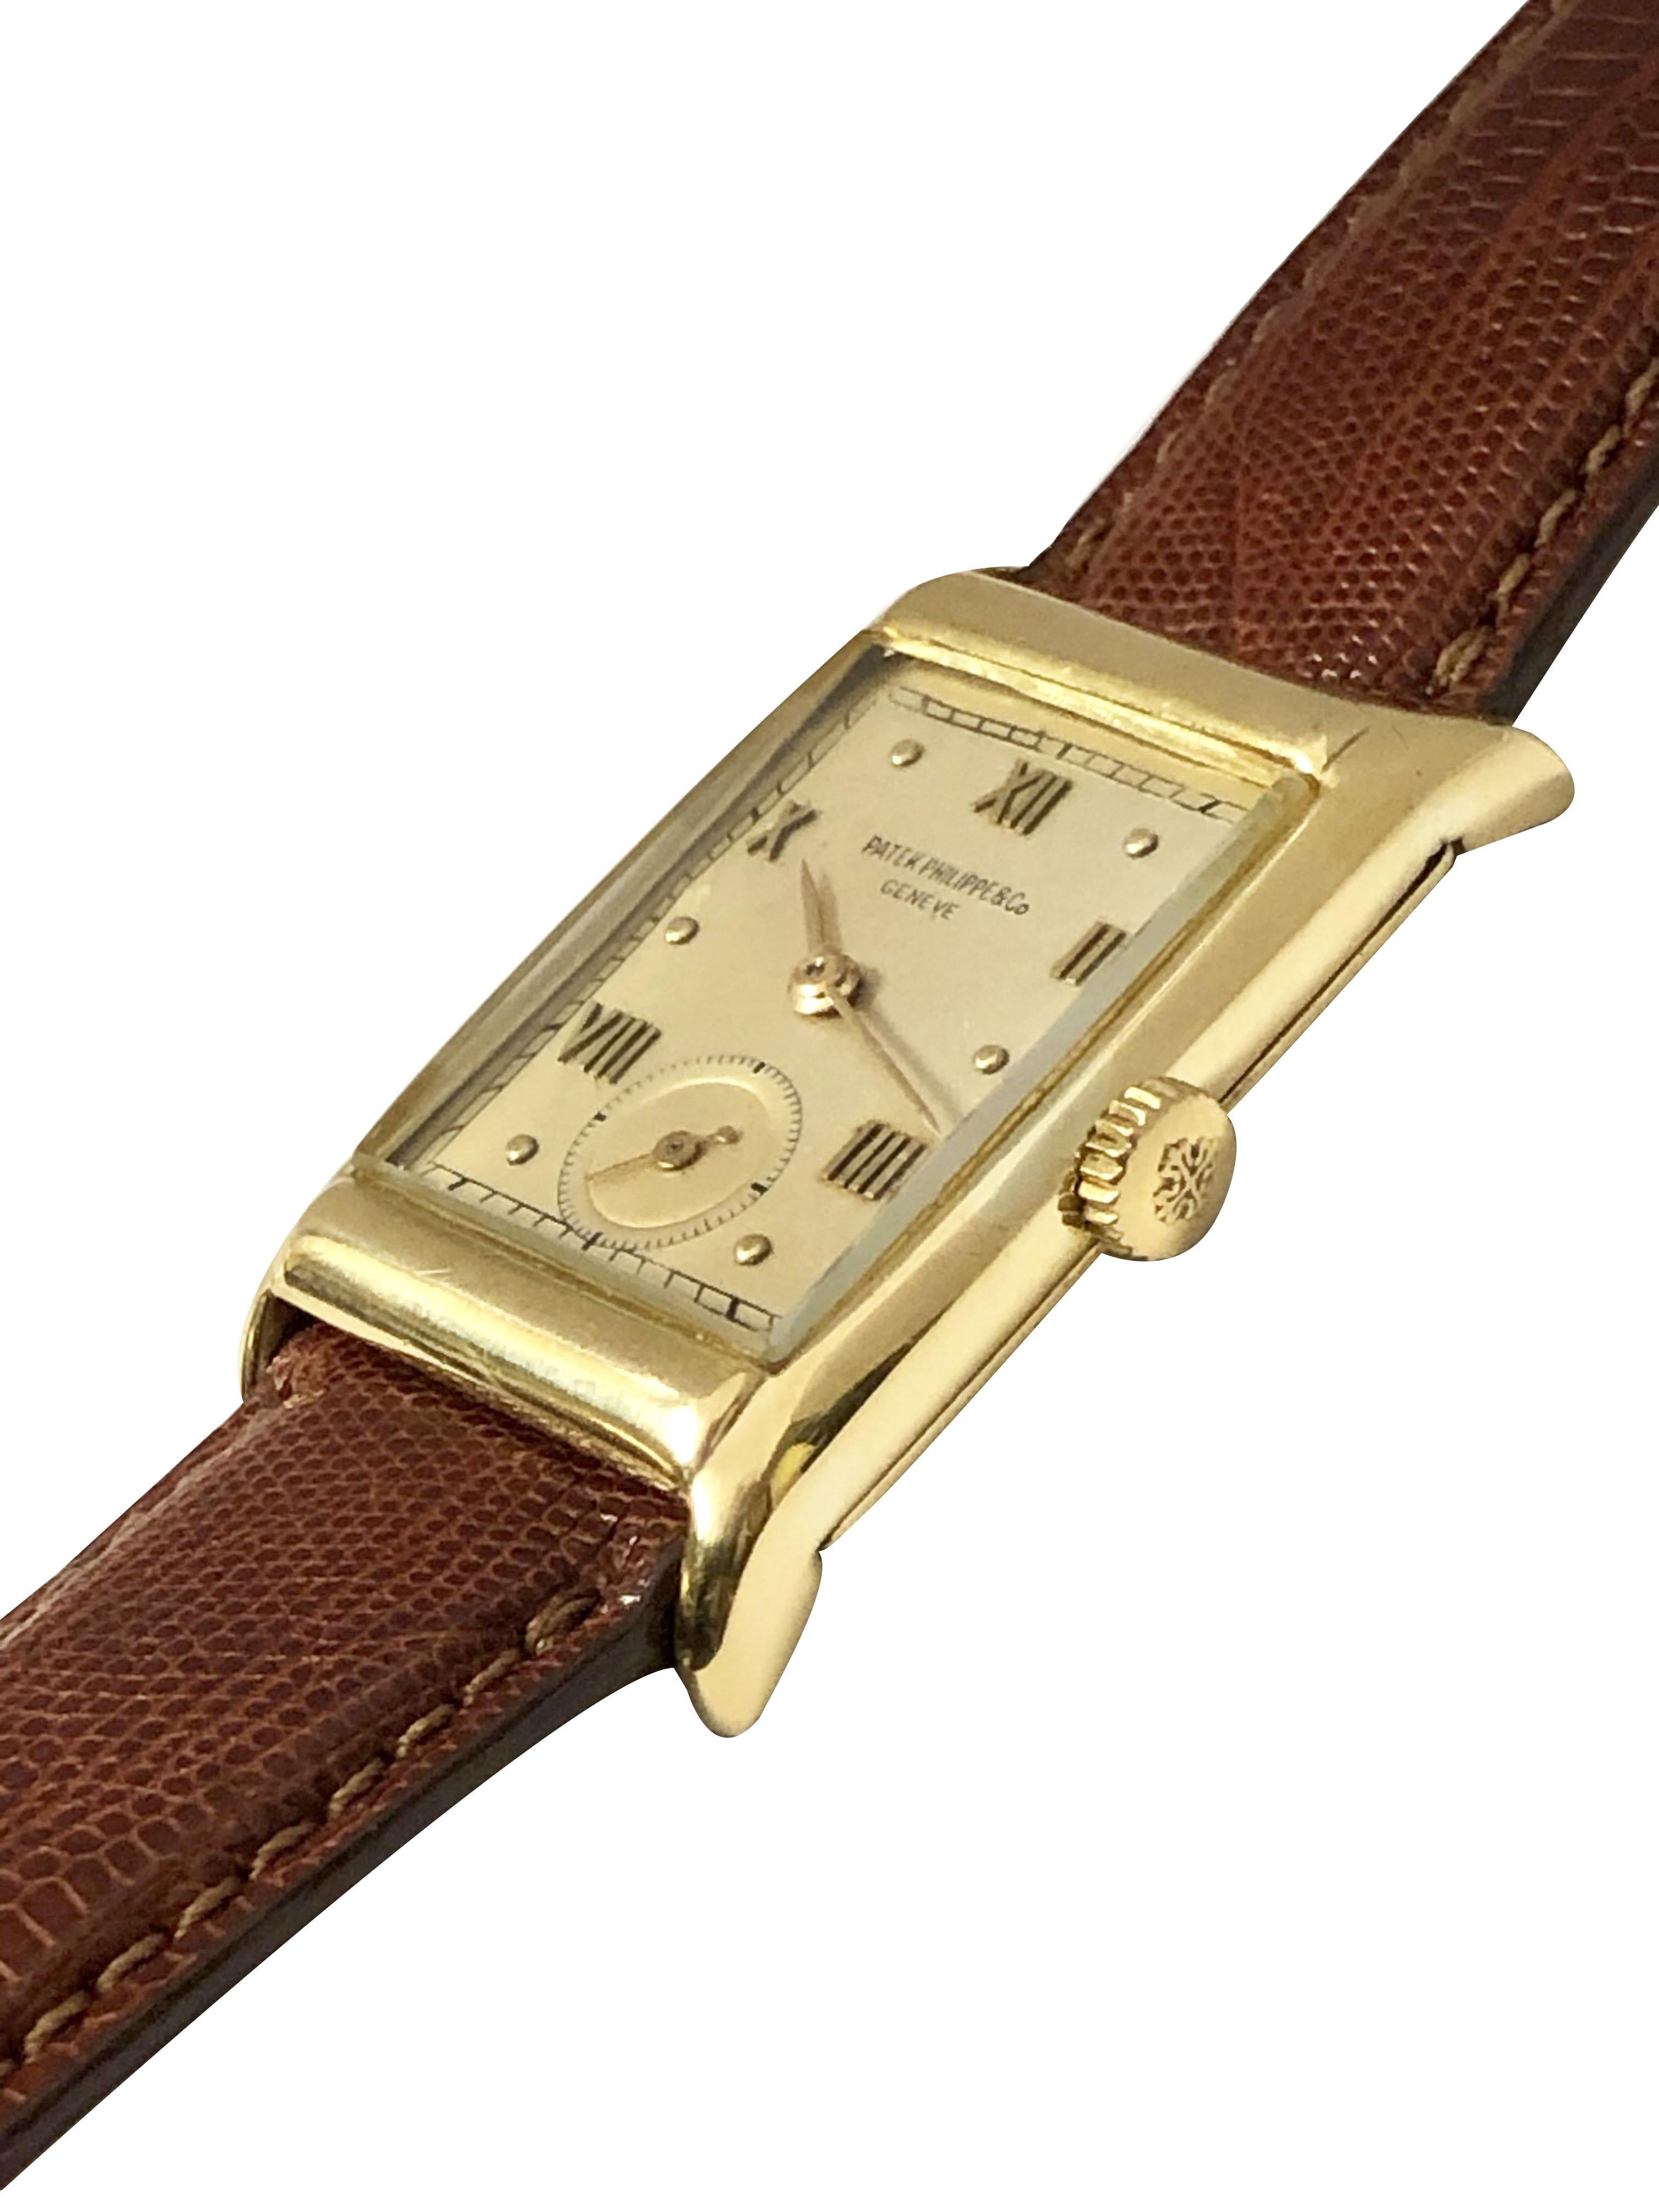 Circa 1940s Patek Philippe Wrist watch, 40 X 24 M.M. 2 Piece 18K yellow Gold case. 18 Jewel Mechanical, Manual wind nickle lever movement. Patek Philippe Logo crown, Silver Satin dial with raised Gold markers. New Hadley Roma Brown Lizard strap,